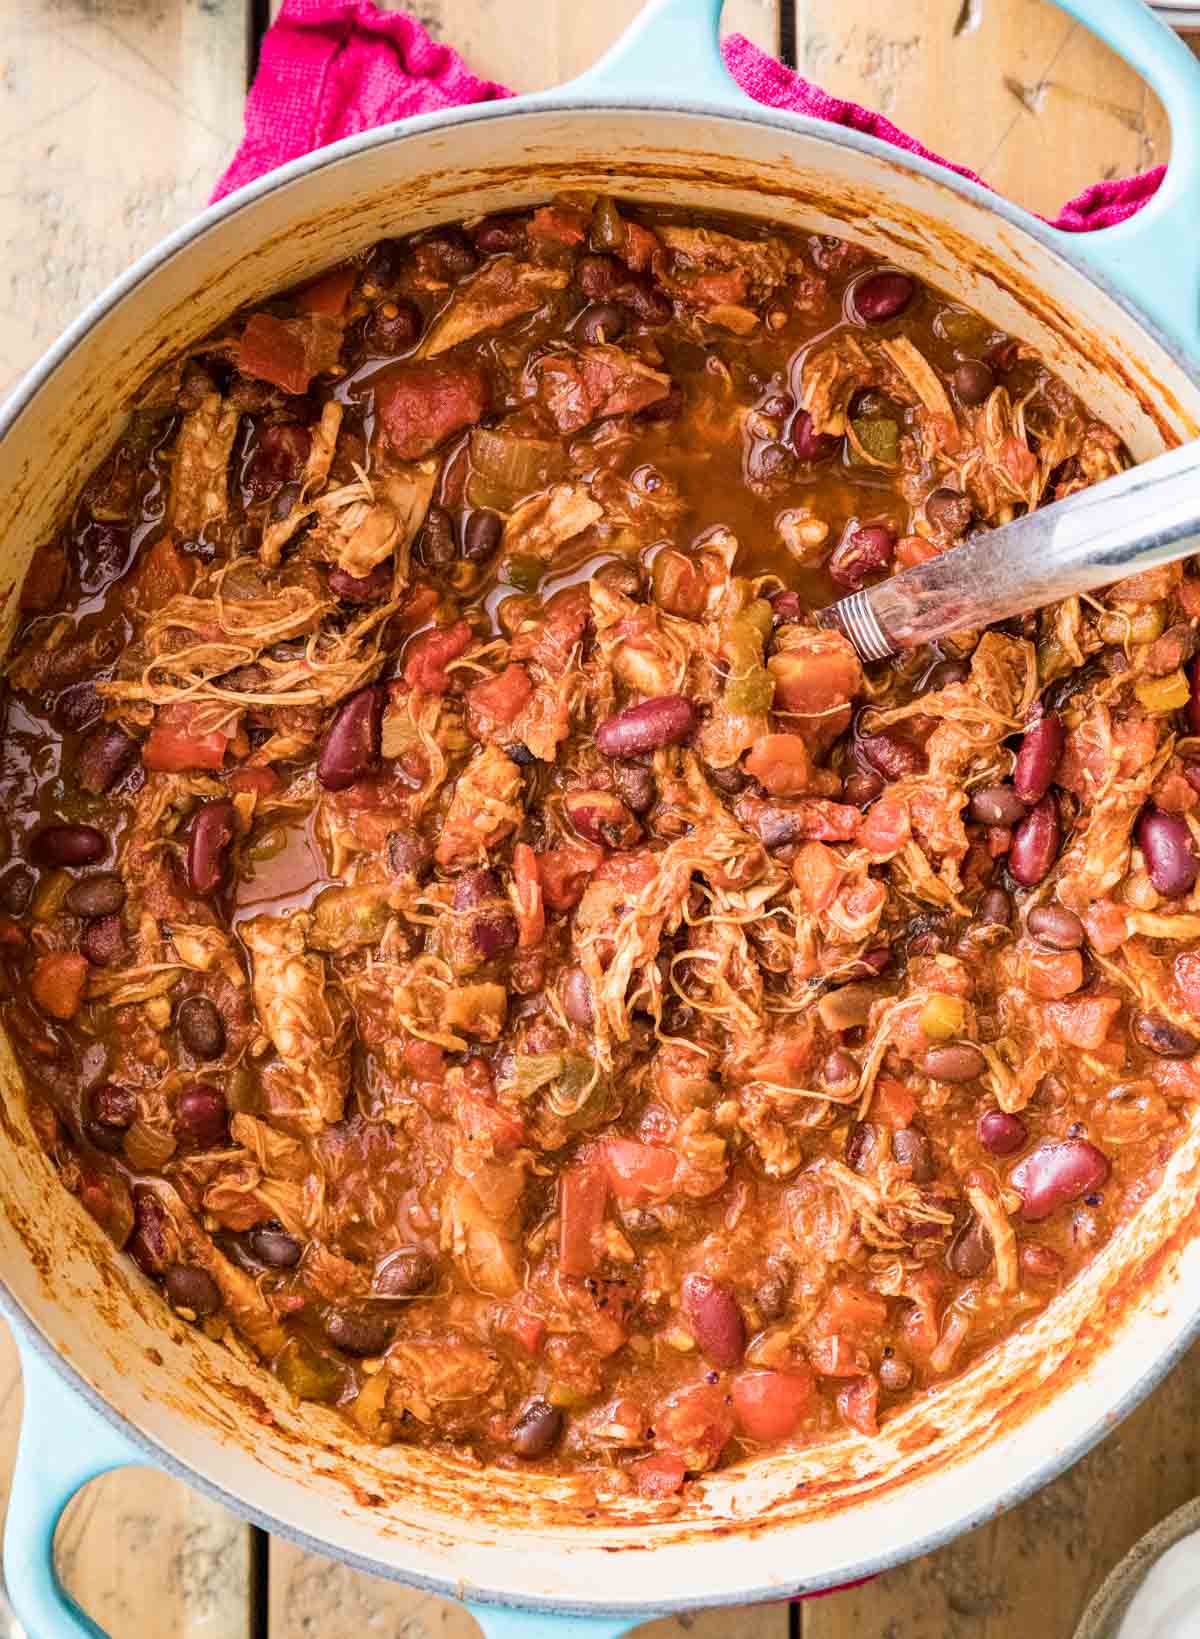 Overhead view of chili made with shredded turkey, beans, and more.